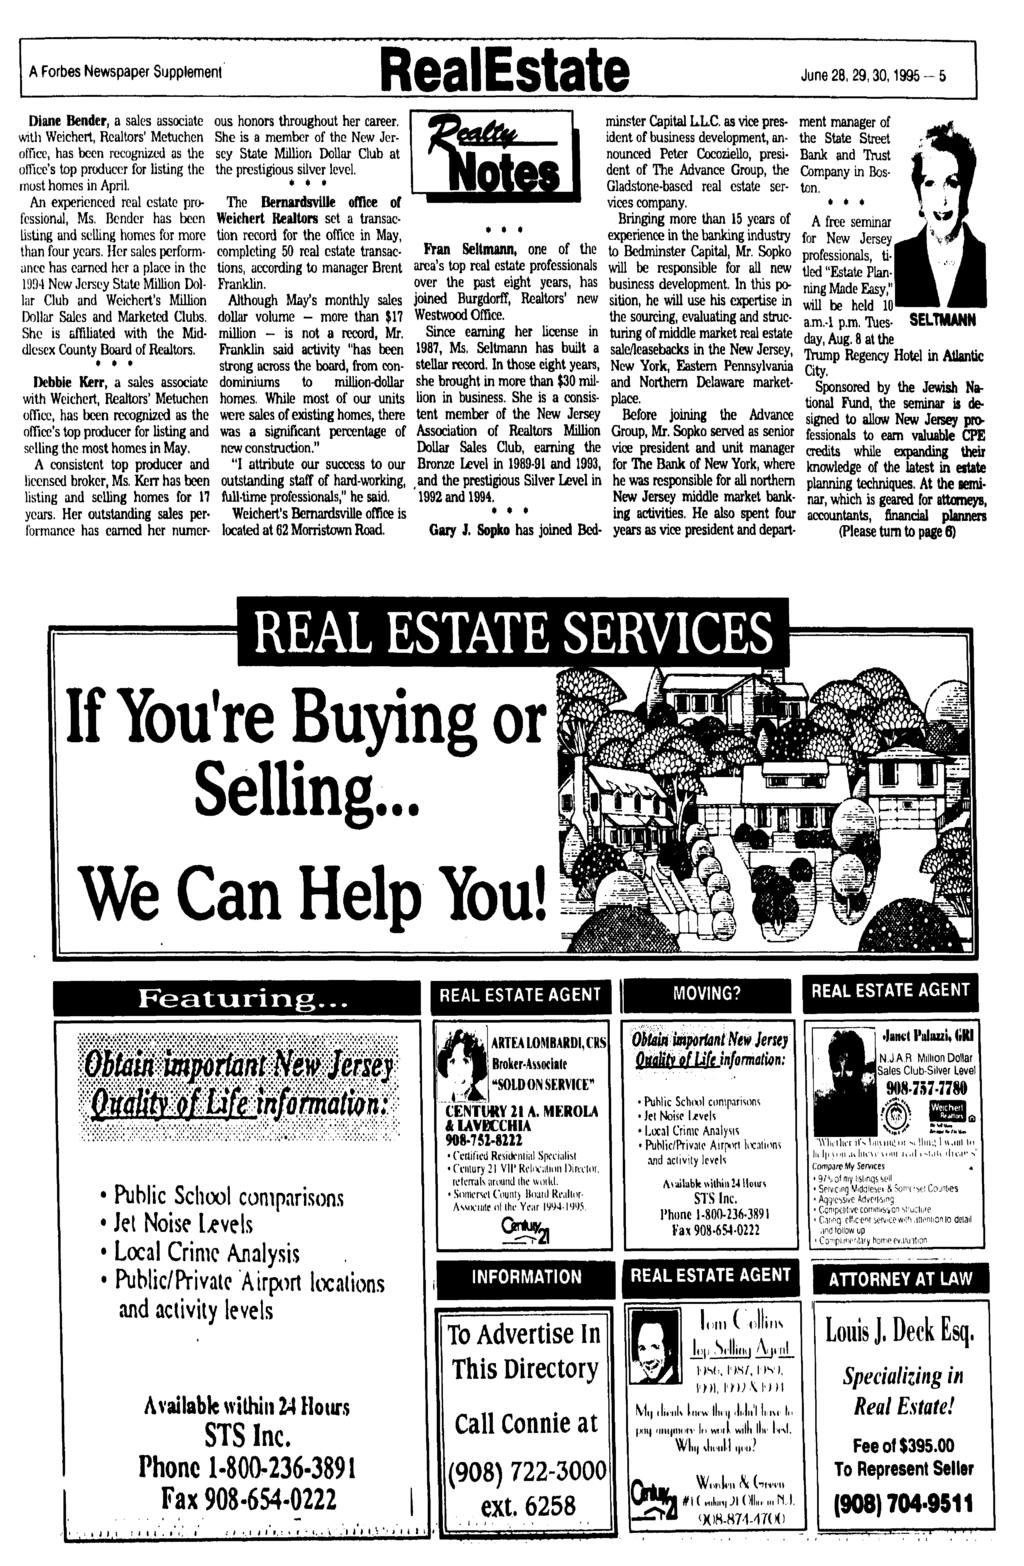 A Forbes Newspaper Supplement RealEstate June 28,29,30,1995-5 Diane Bender, a sales associate with Weichert, Realtors' Metuchen office, has been recognized as the office's top producer for listing